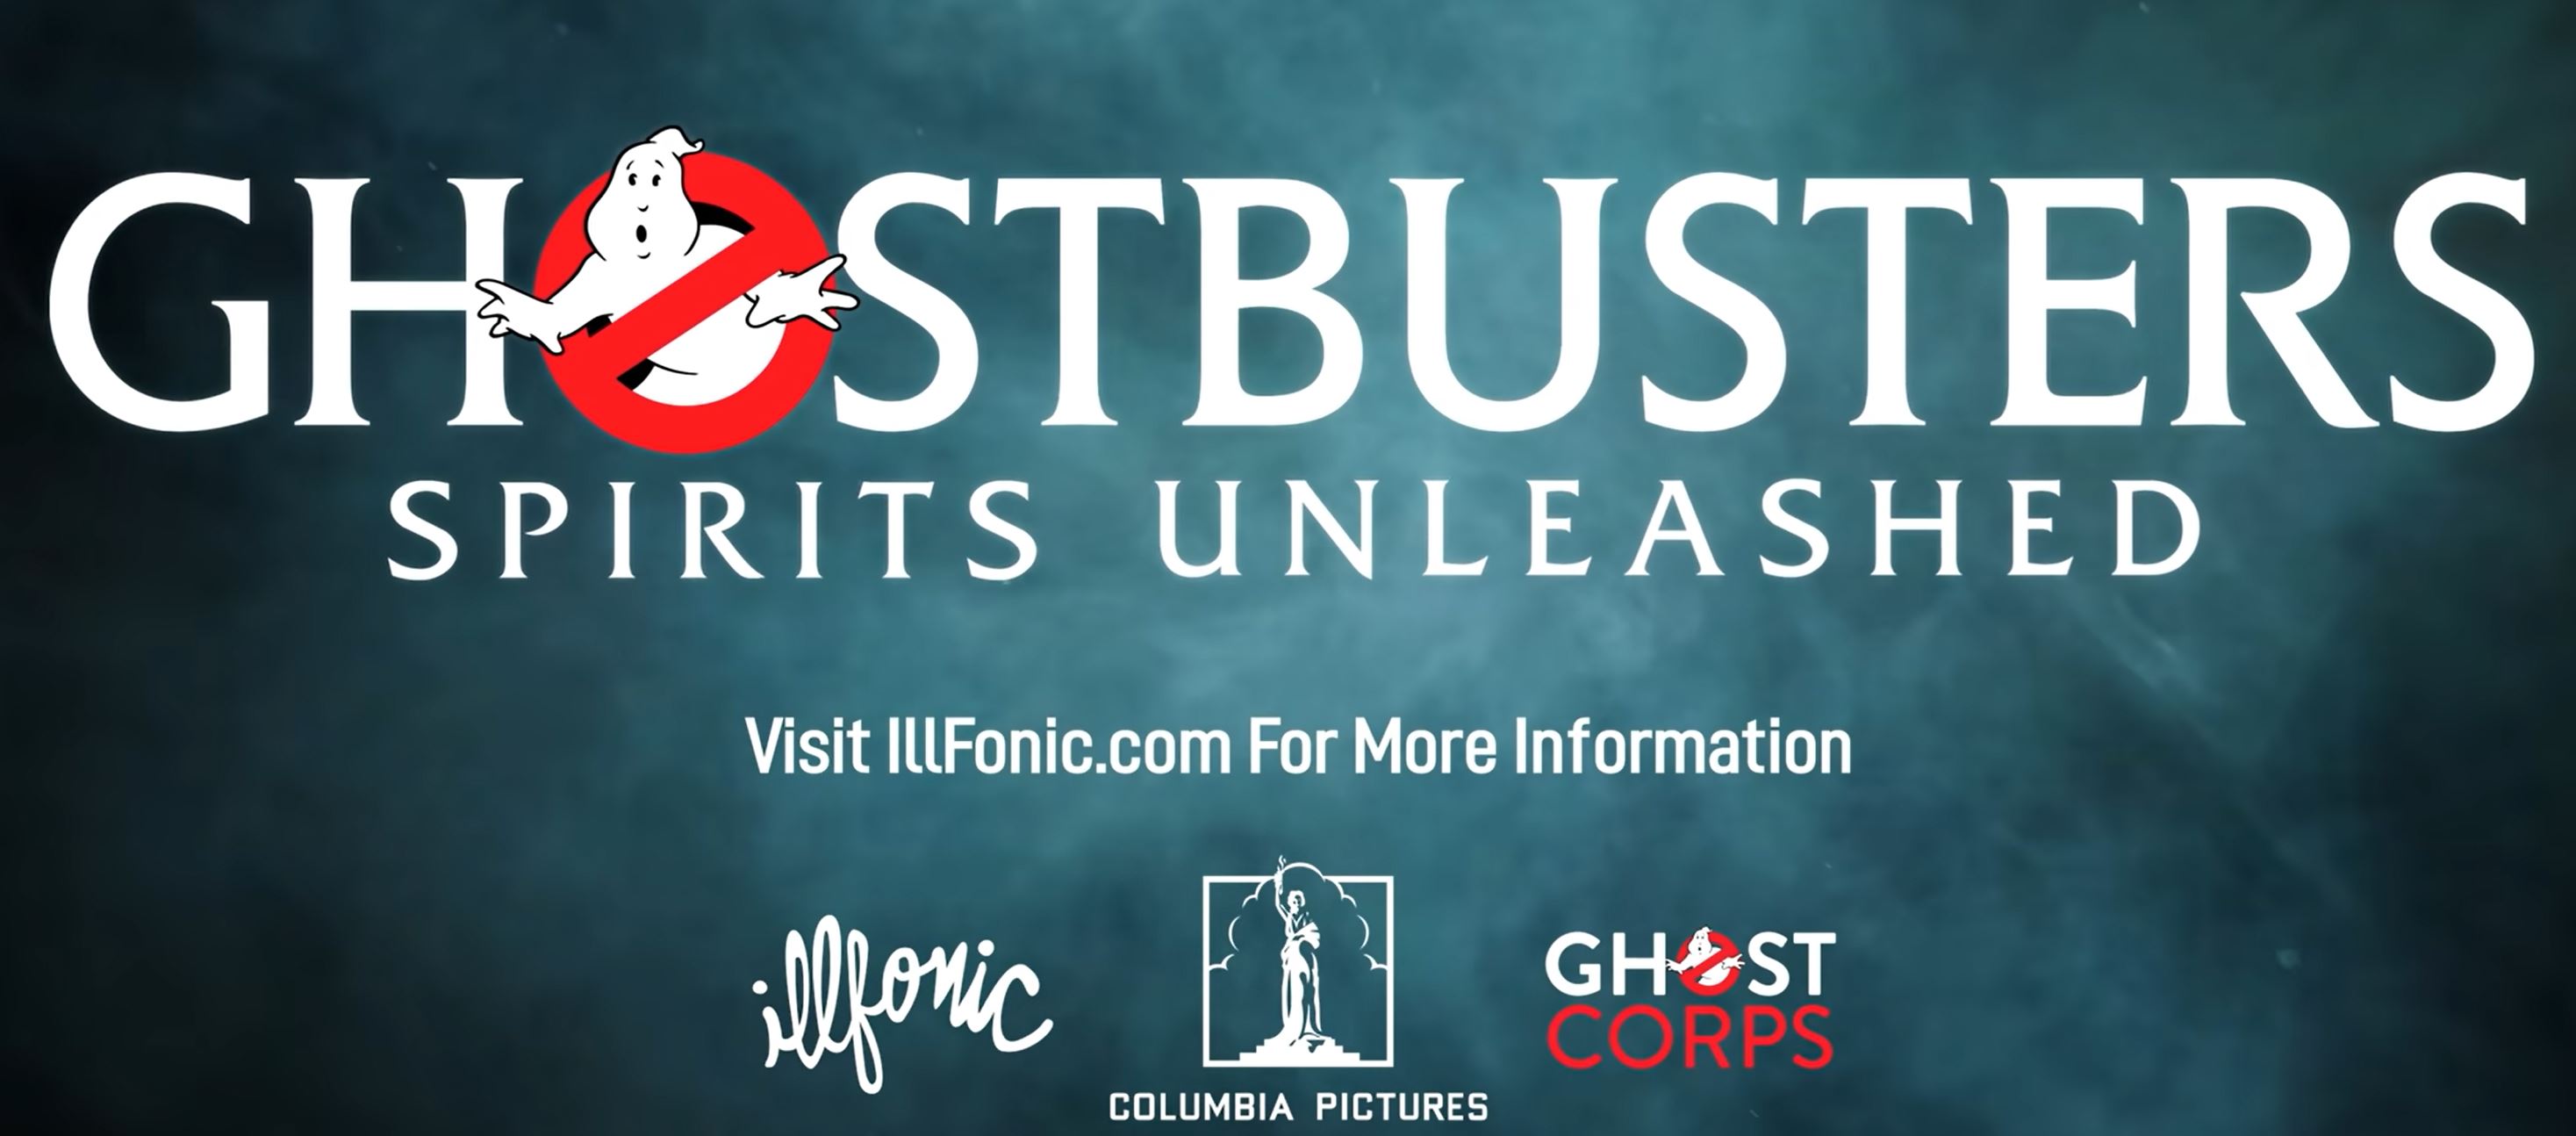 GHOSTBUSTERS: SPIRITS UNLEASHED ARRIVA SU SWITCH QUEST’ANNO